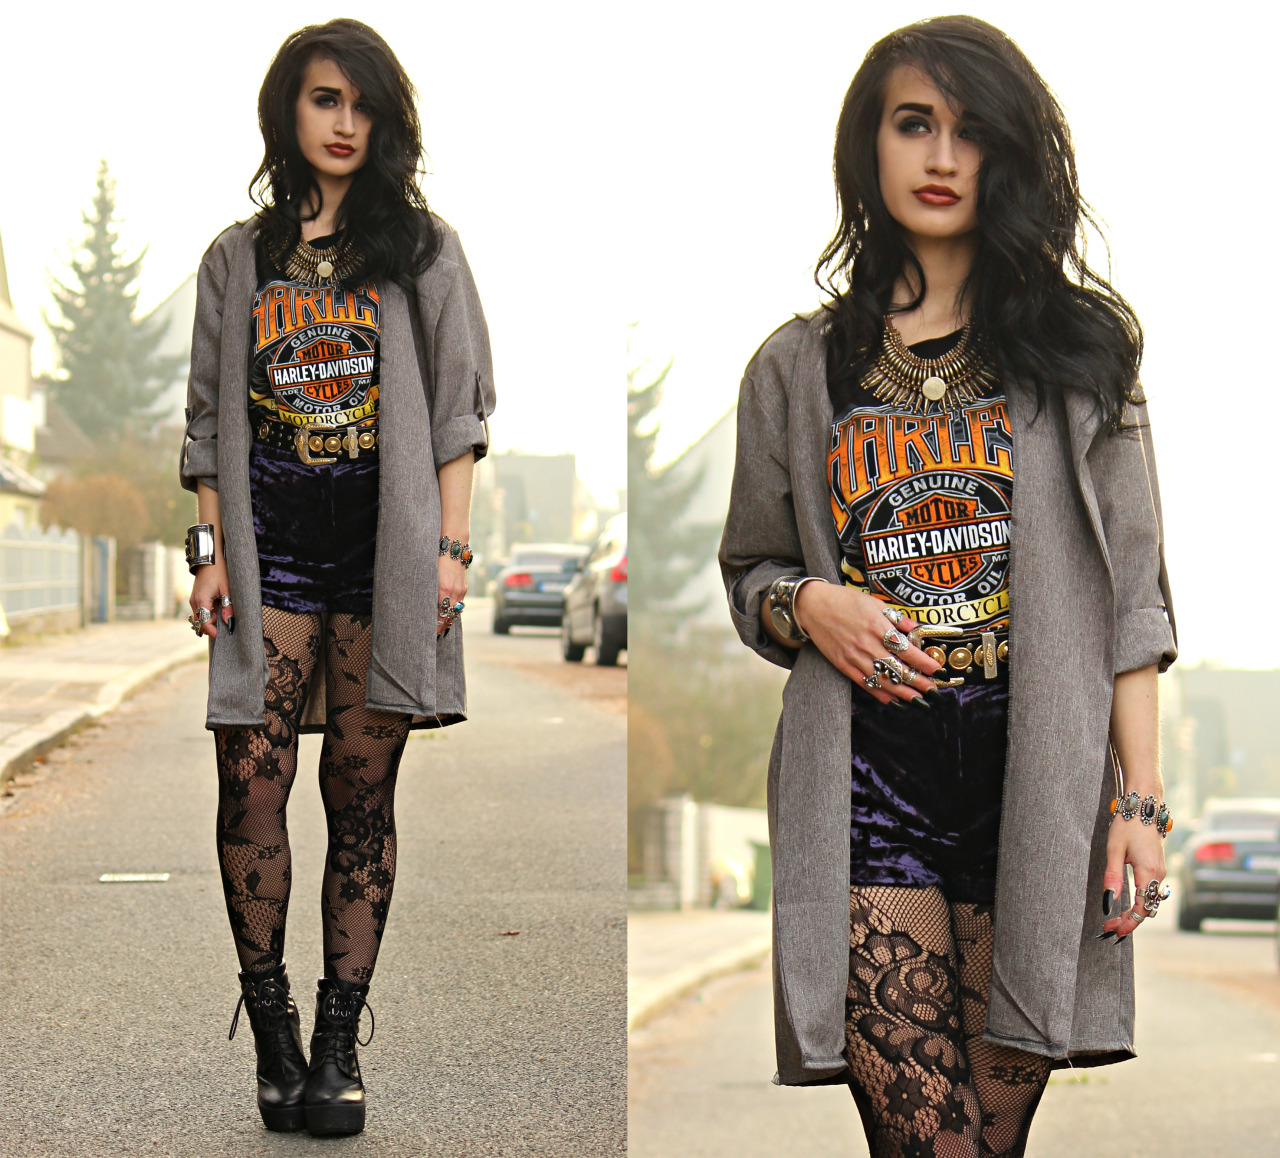 rock club outfit